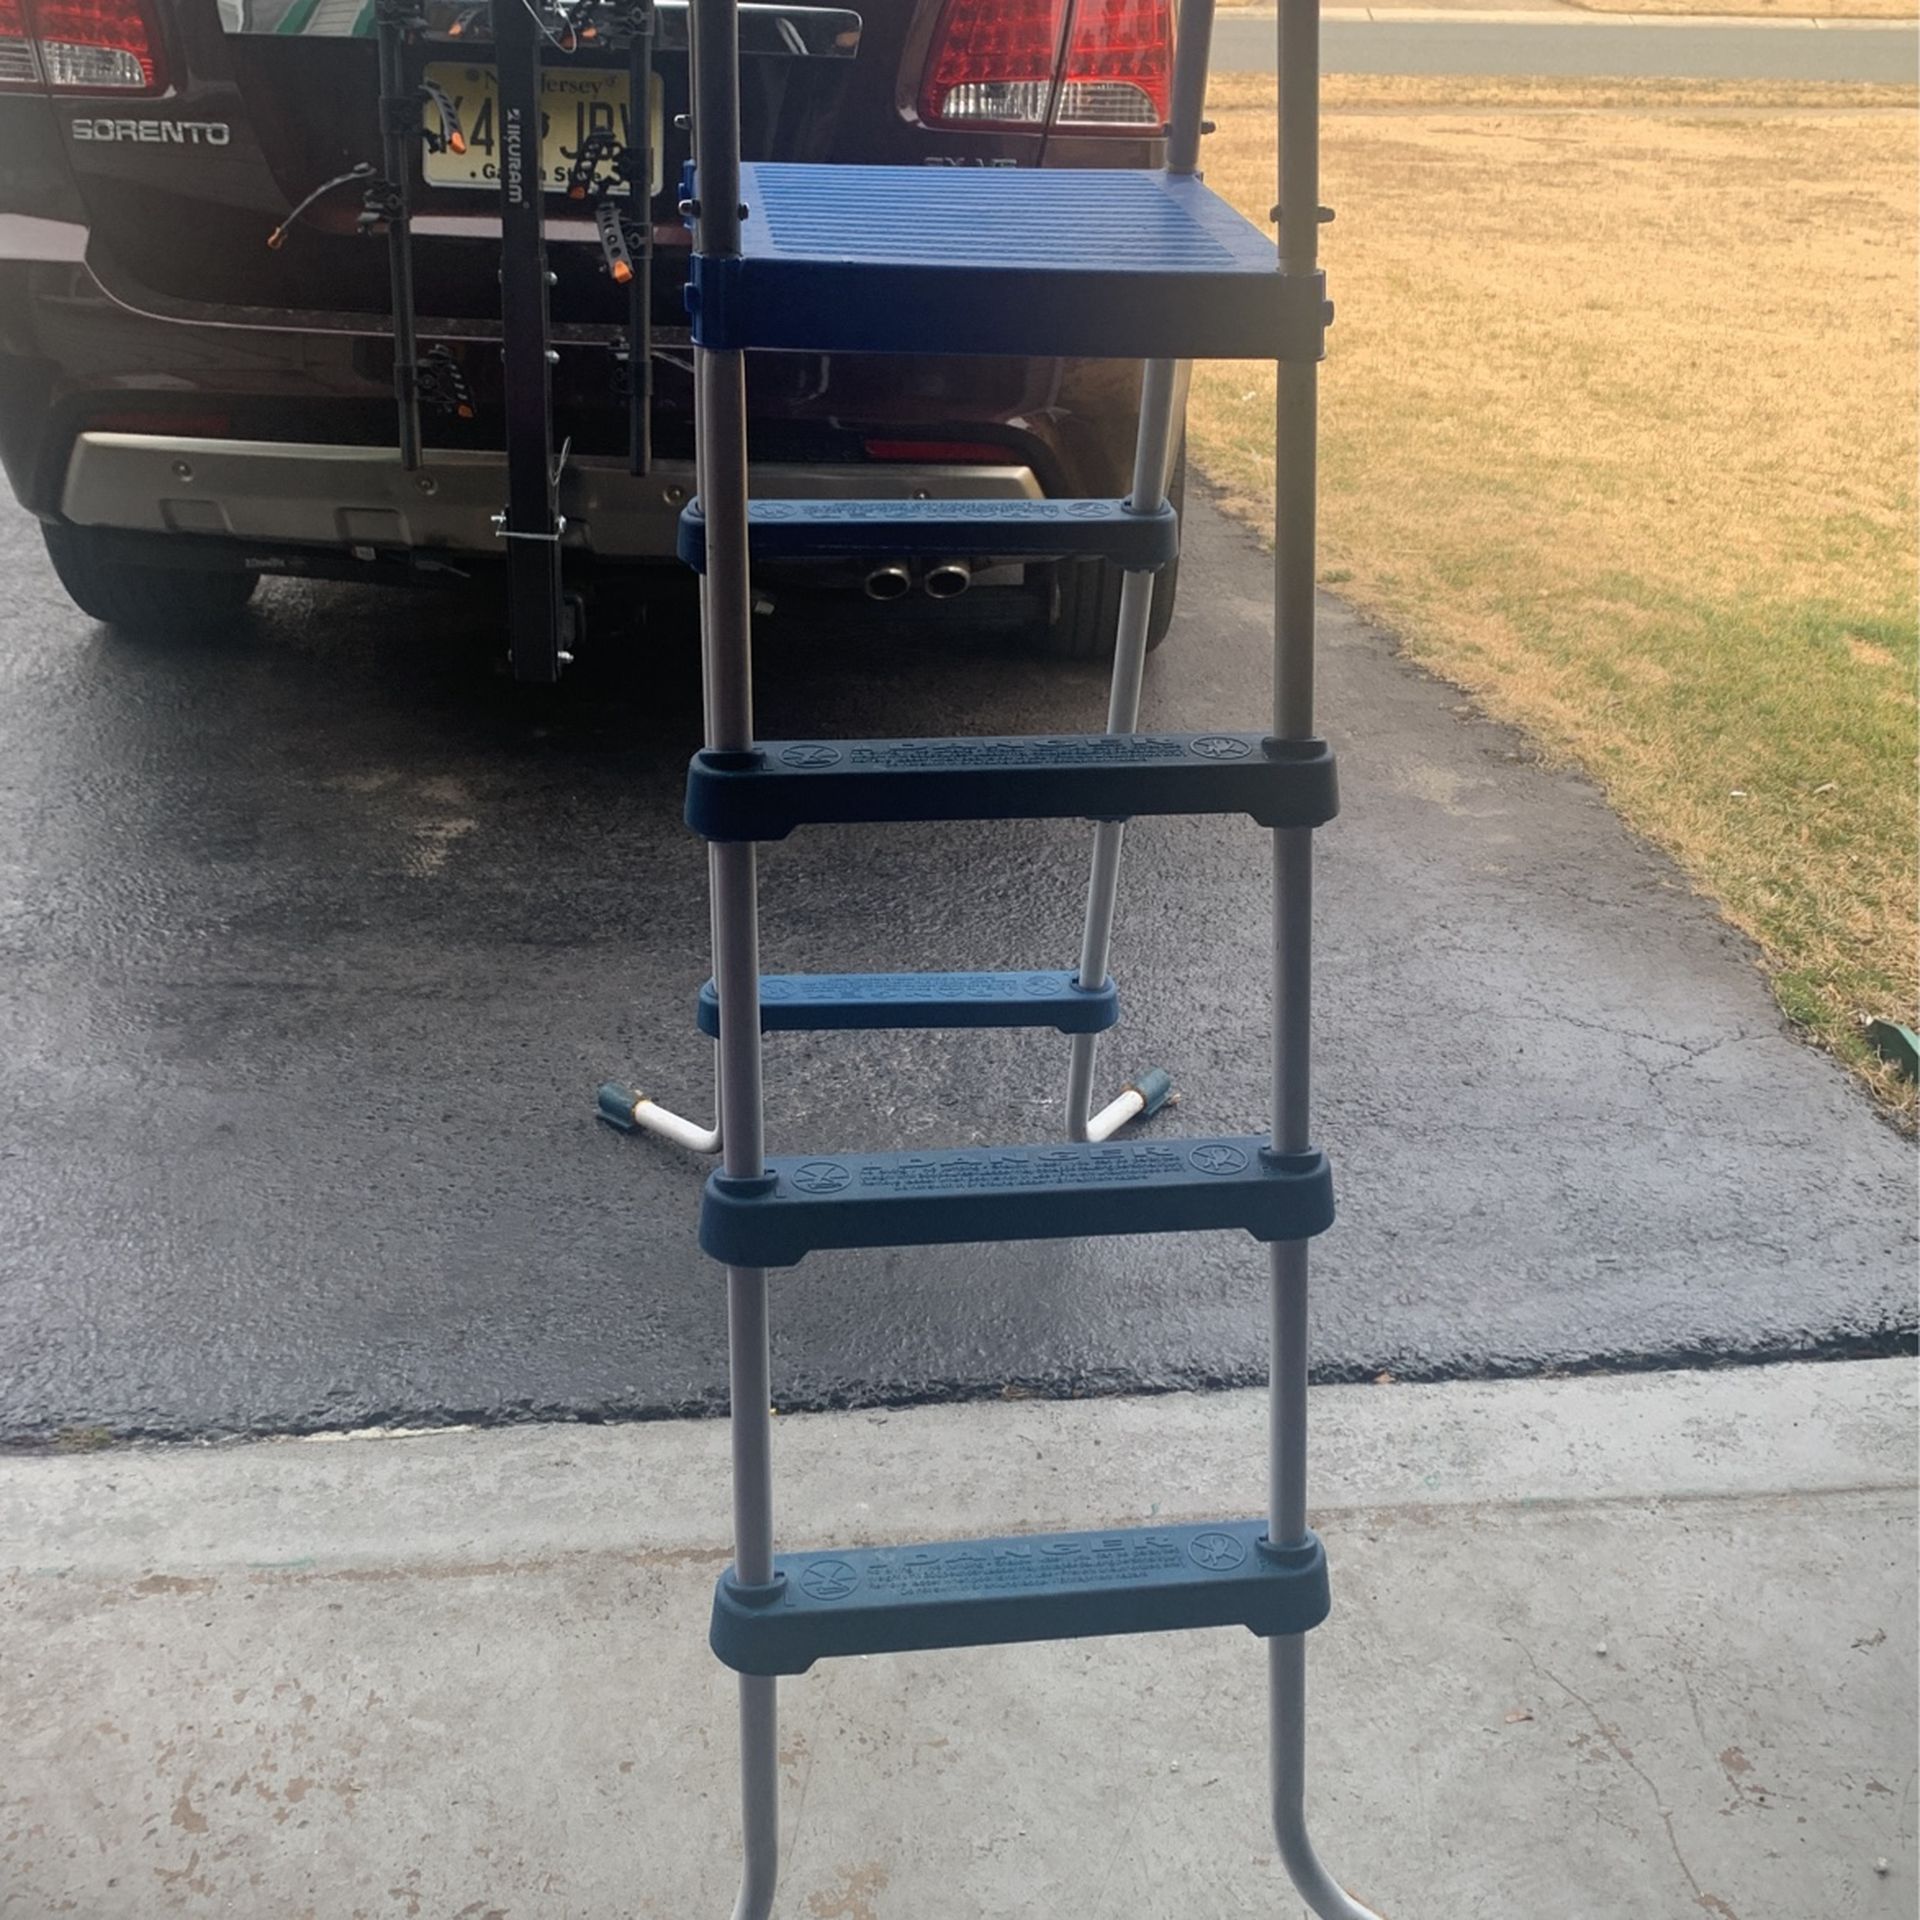 Pool Ladder Very Sturdy 48 To 52 Pool Size